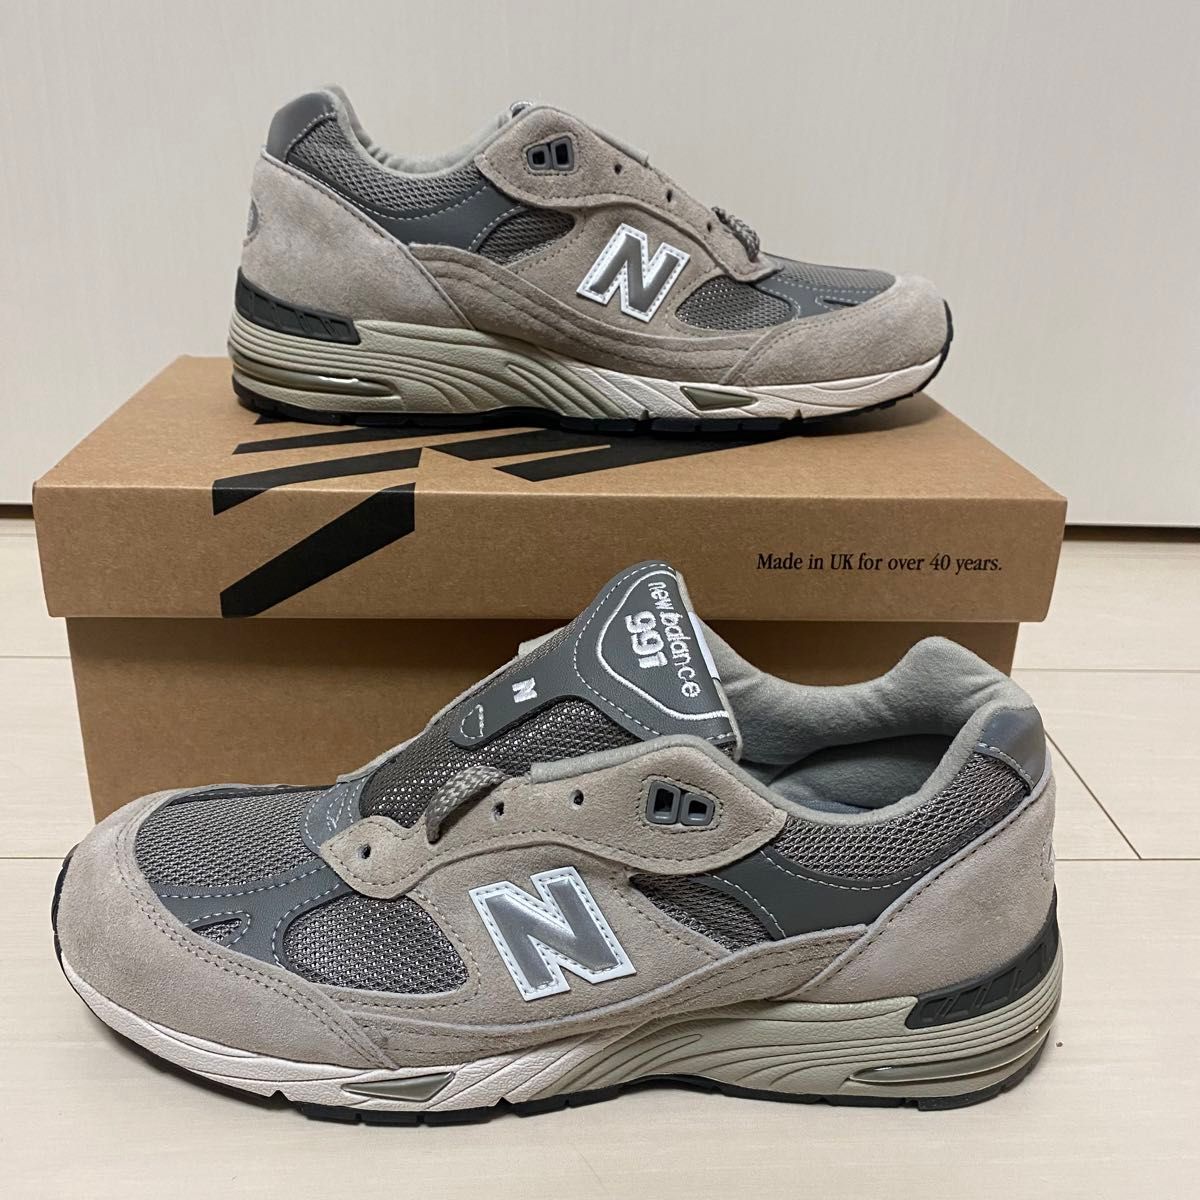 made in UK NEW BALANCE 991 W991GL WUS8.5